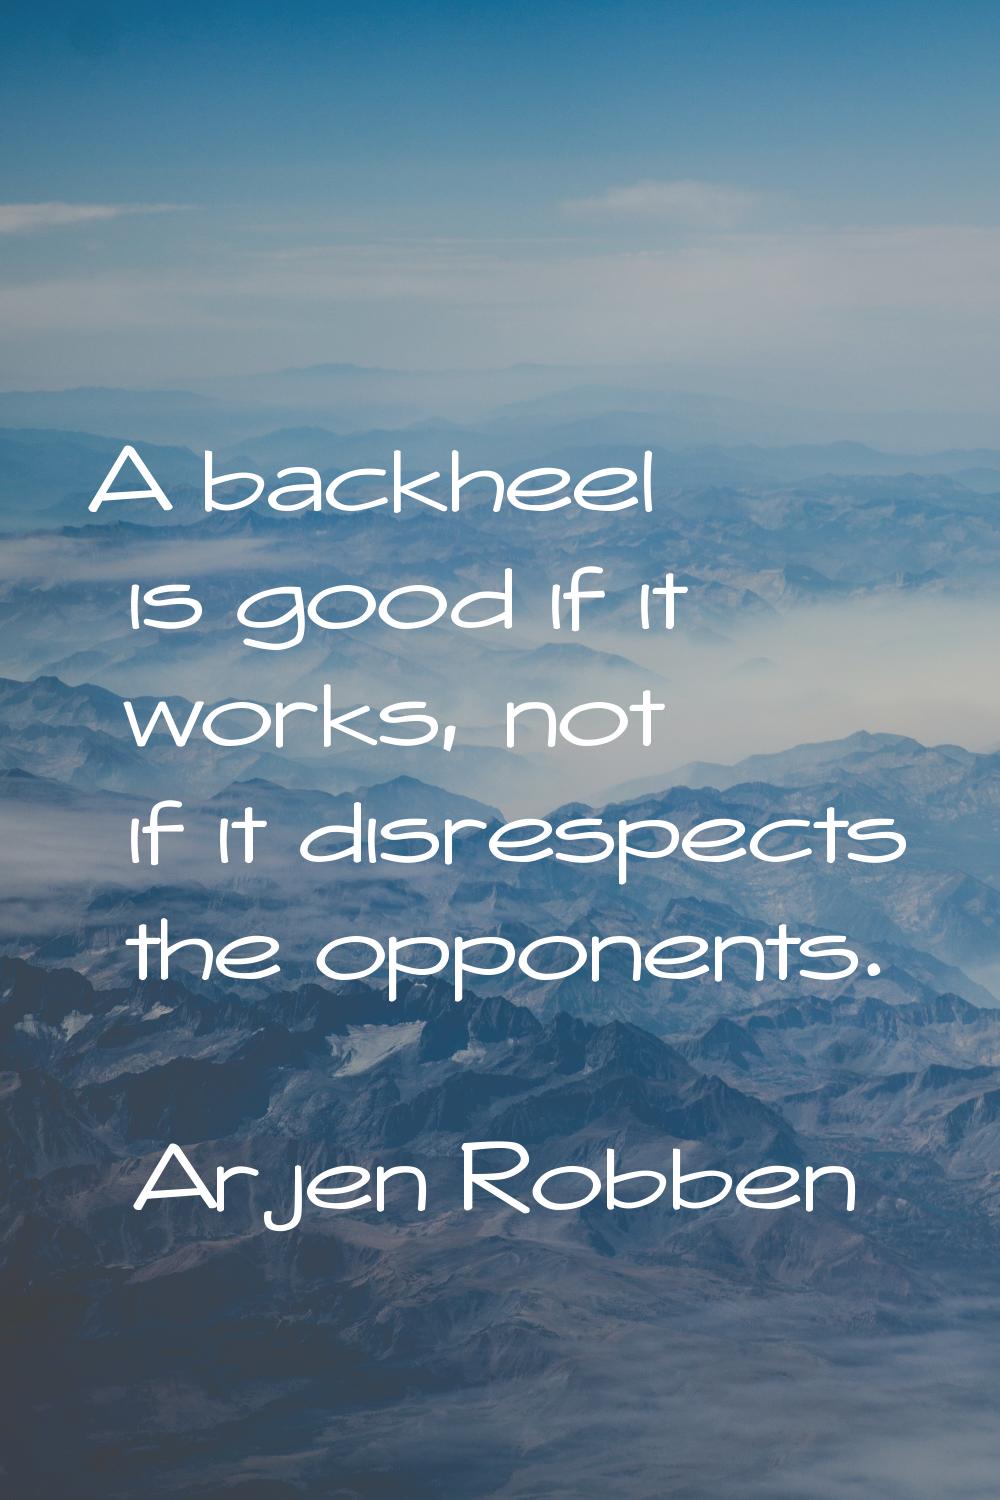 A backheel is good if it works, not if it disrespects the opponents.